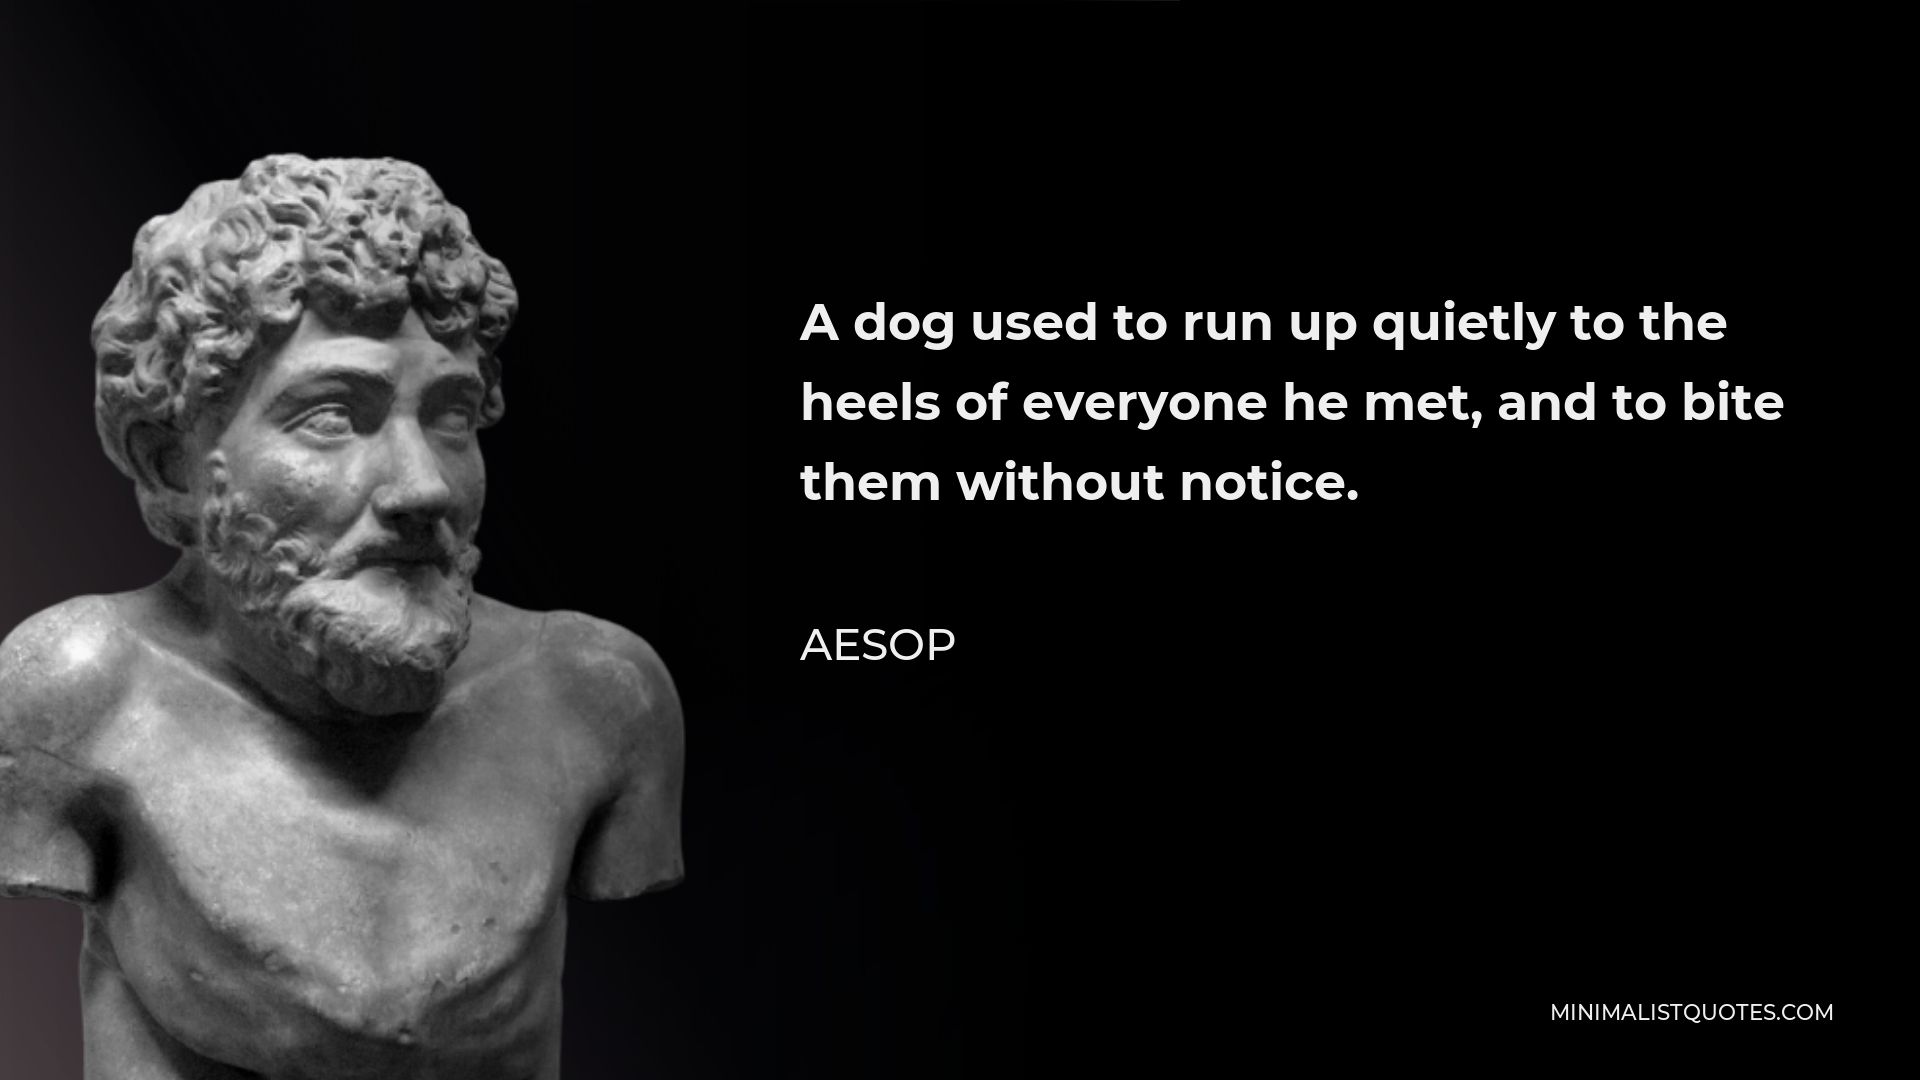 Aesop Quote - A dog used to run up quietly to the heels of everyone he met, and to bite them without notice.